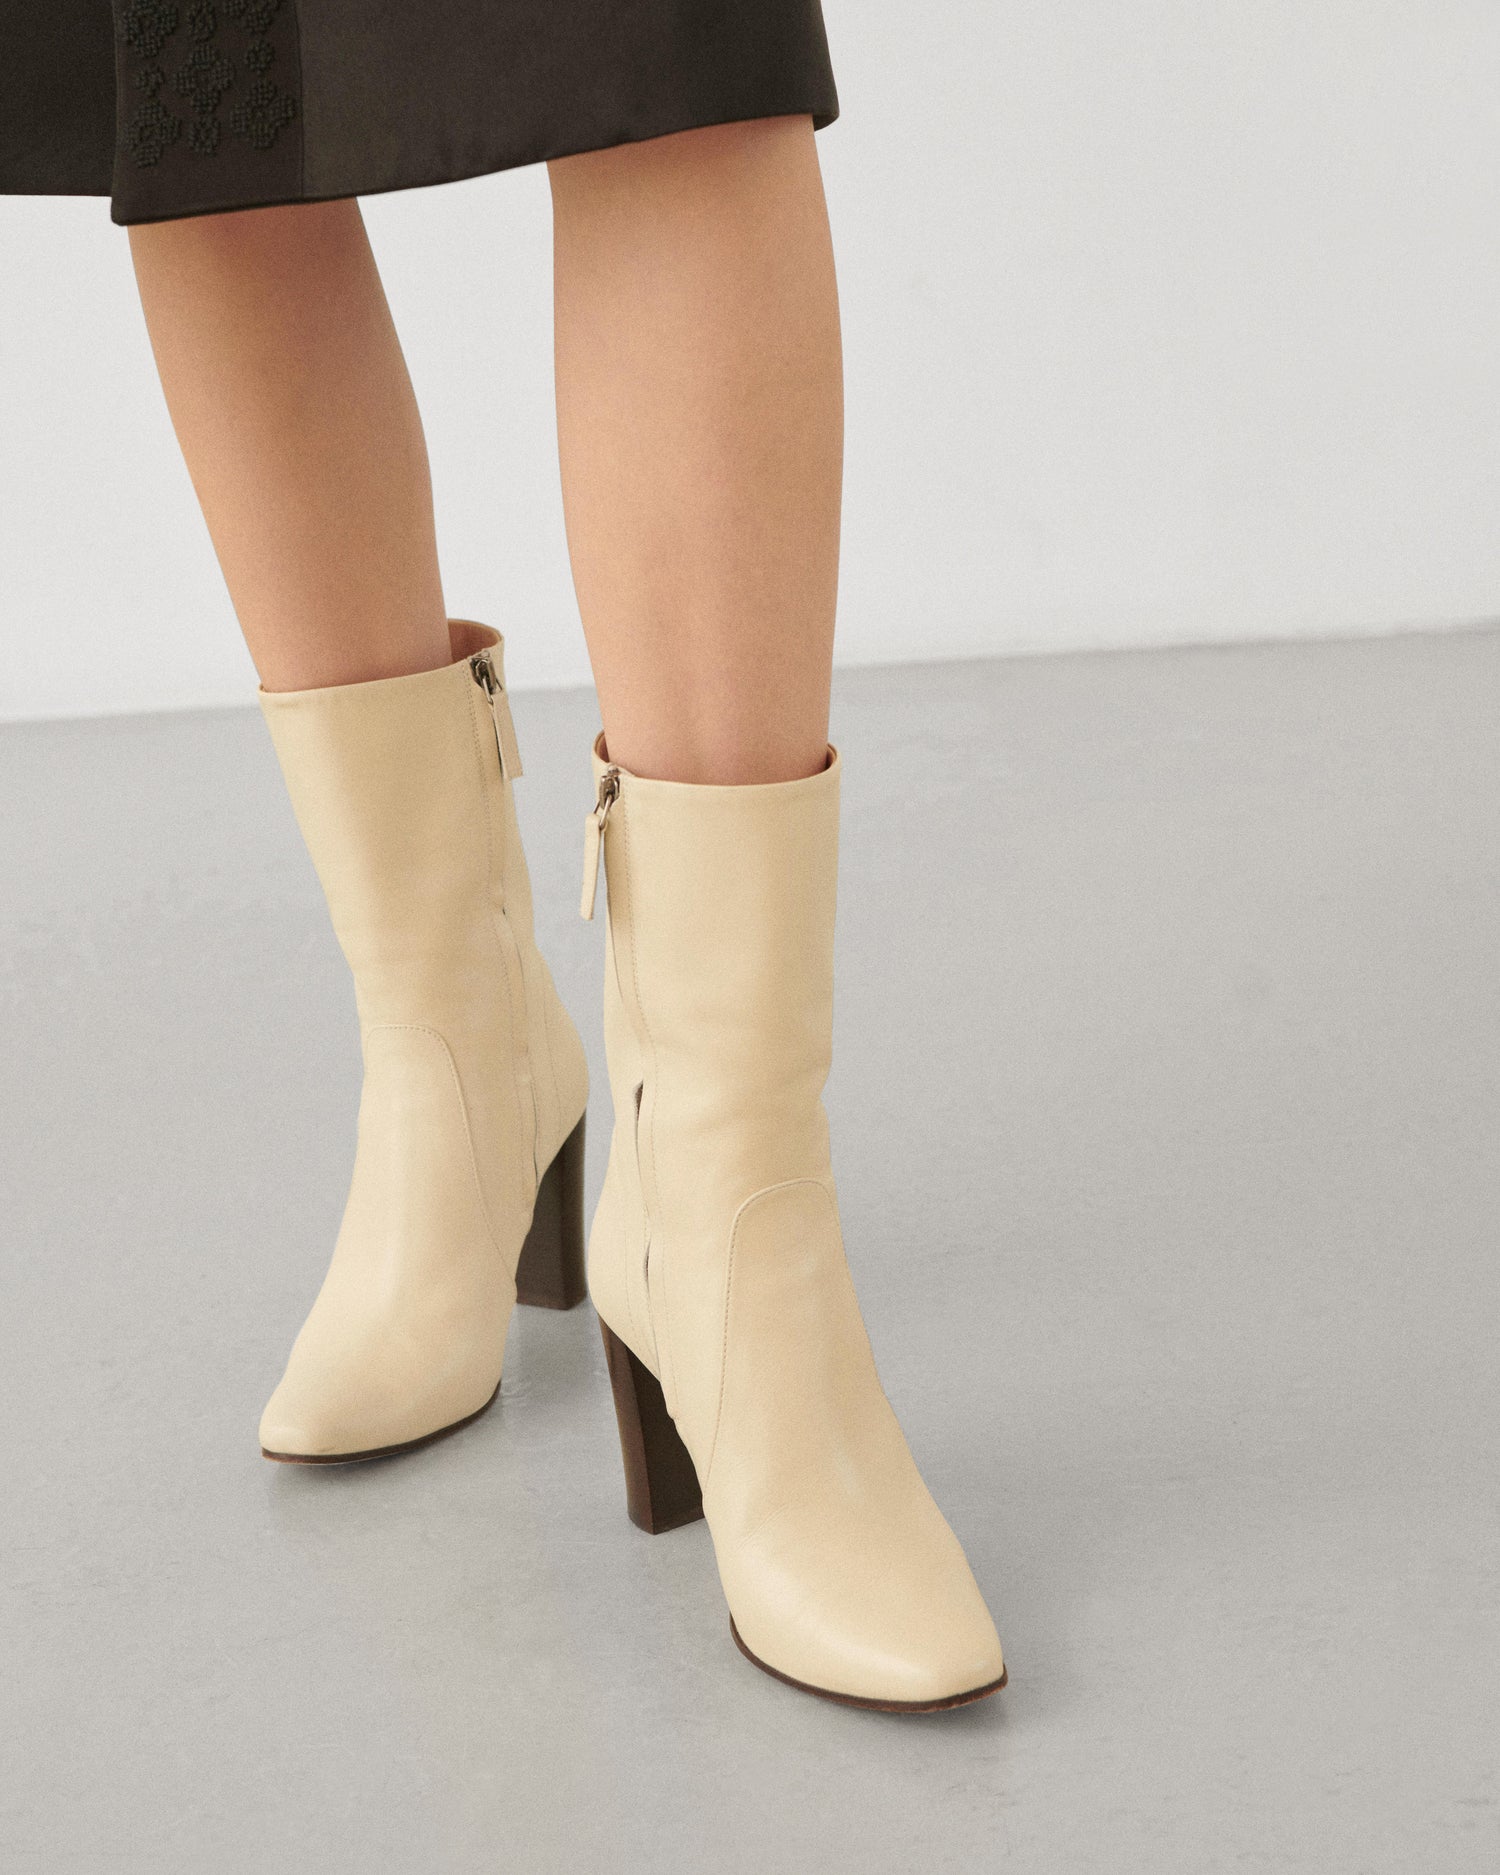 Gaia Heeled Ankle Boots in Leather, Limestone